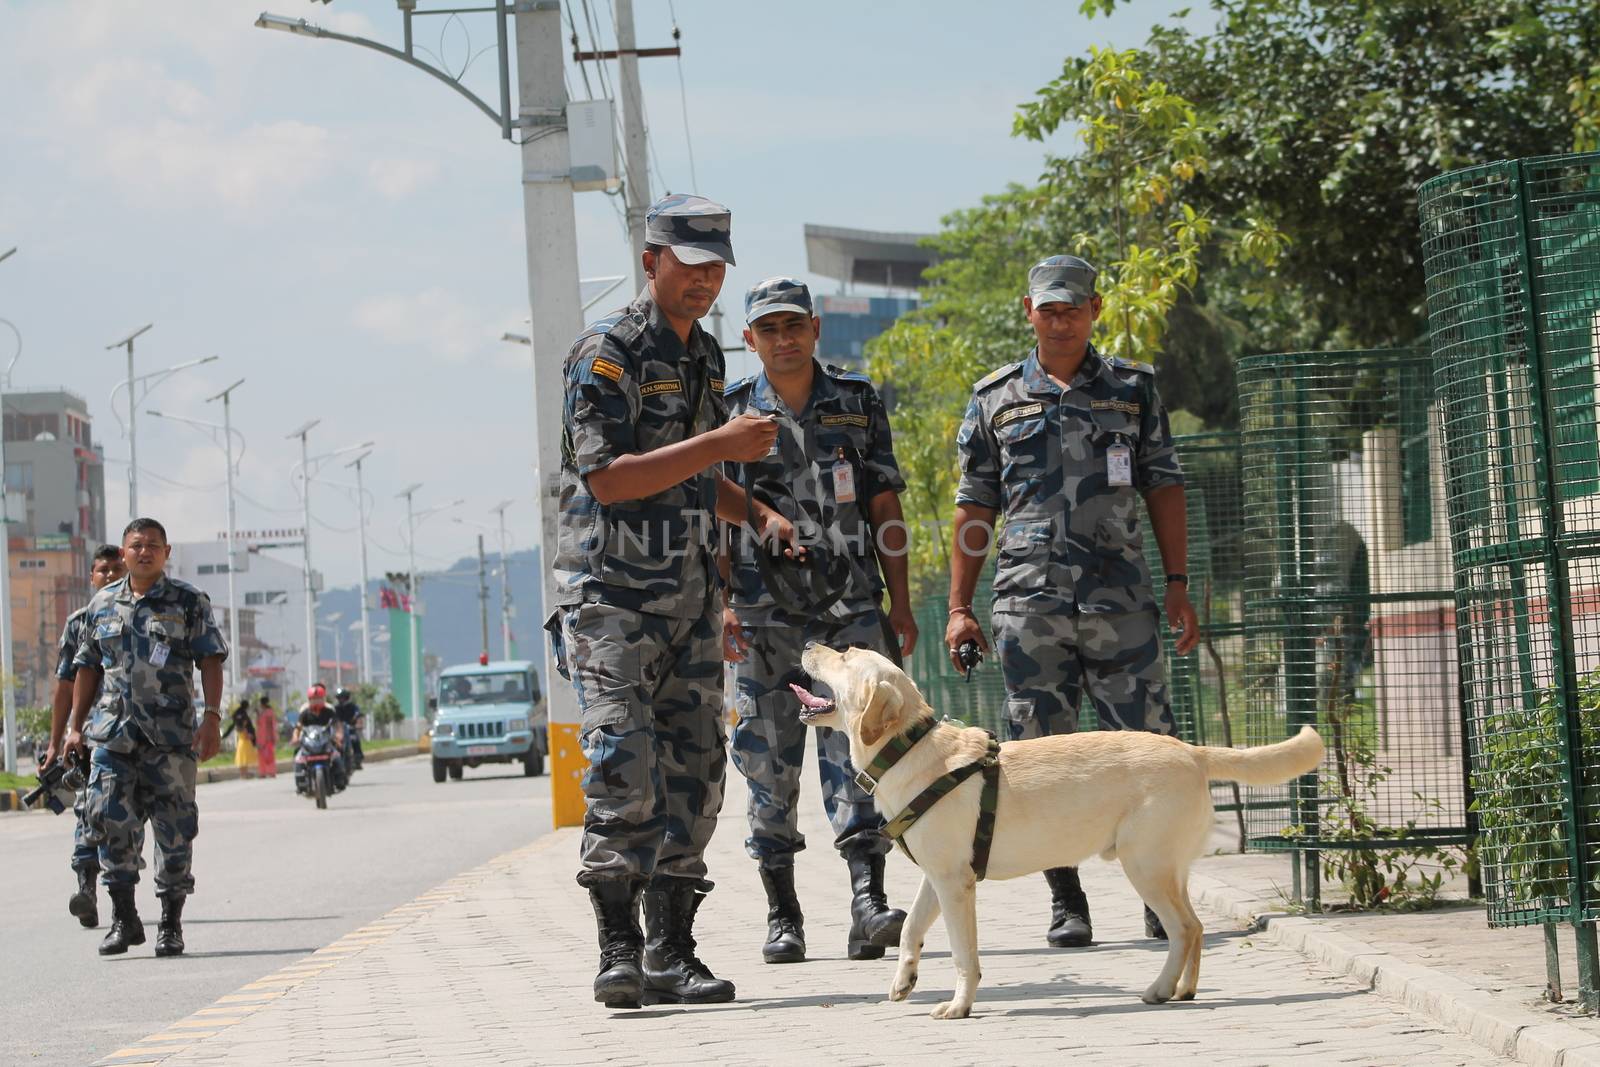 s a dog as Nepal celebrates a new constitution embracing the principles of republicanism, federalism, secularism, and inclusiveness, in Kathmandu on September 20, 2015. Out of the 598 members of the Constituent Assembly, 507 voted for the new constitution, 25 voted against, and 66 abstained in a vote on September 16, 2015. The event was marked with protests organized by parties of the Tharu and Madhesi ethnic communities, which according to Newzulu contributor Anish Gujarel led to violence in Southern Nepal.